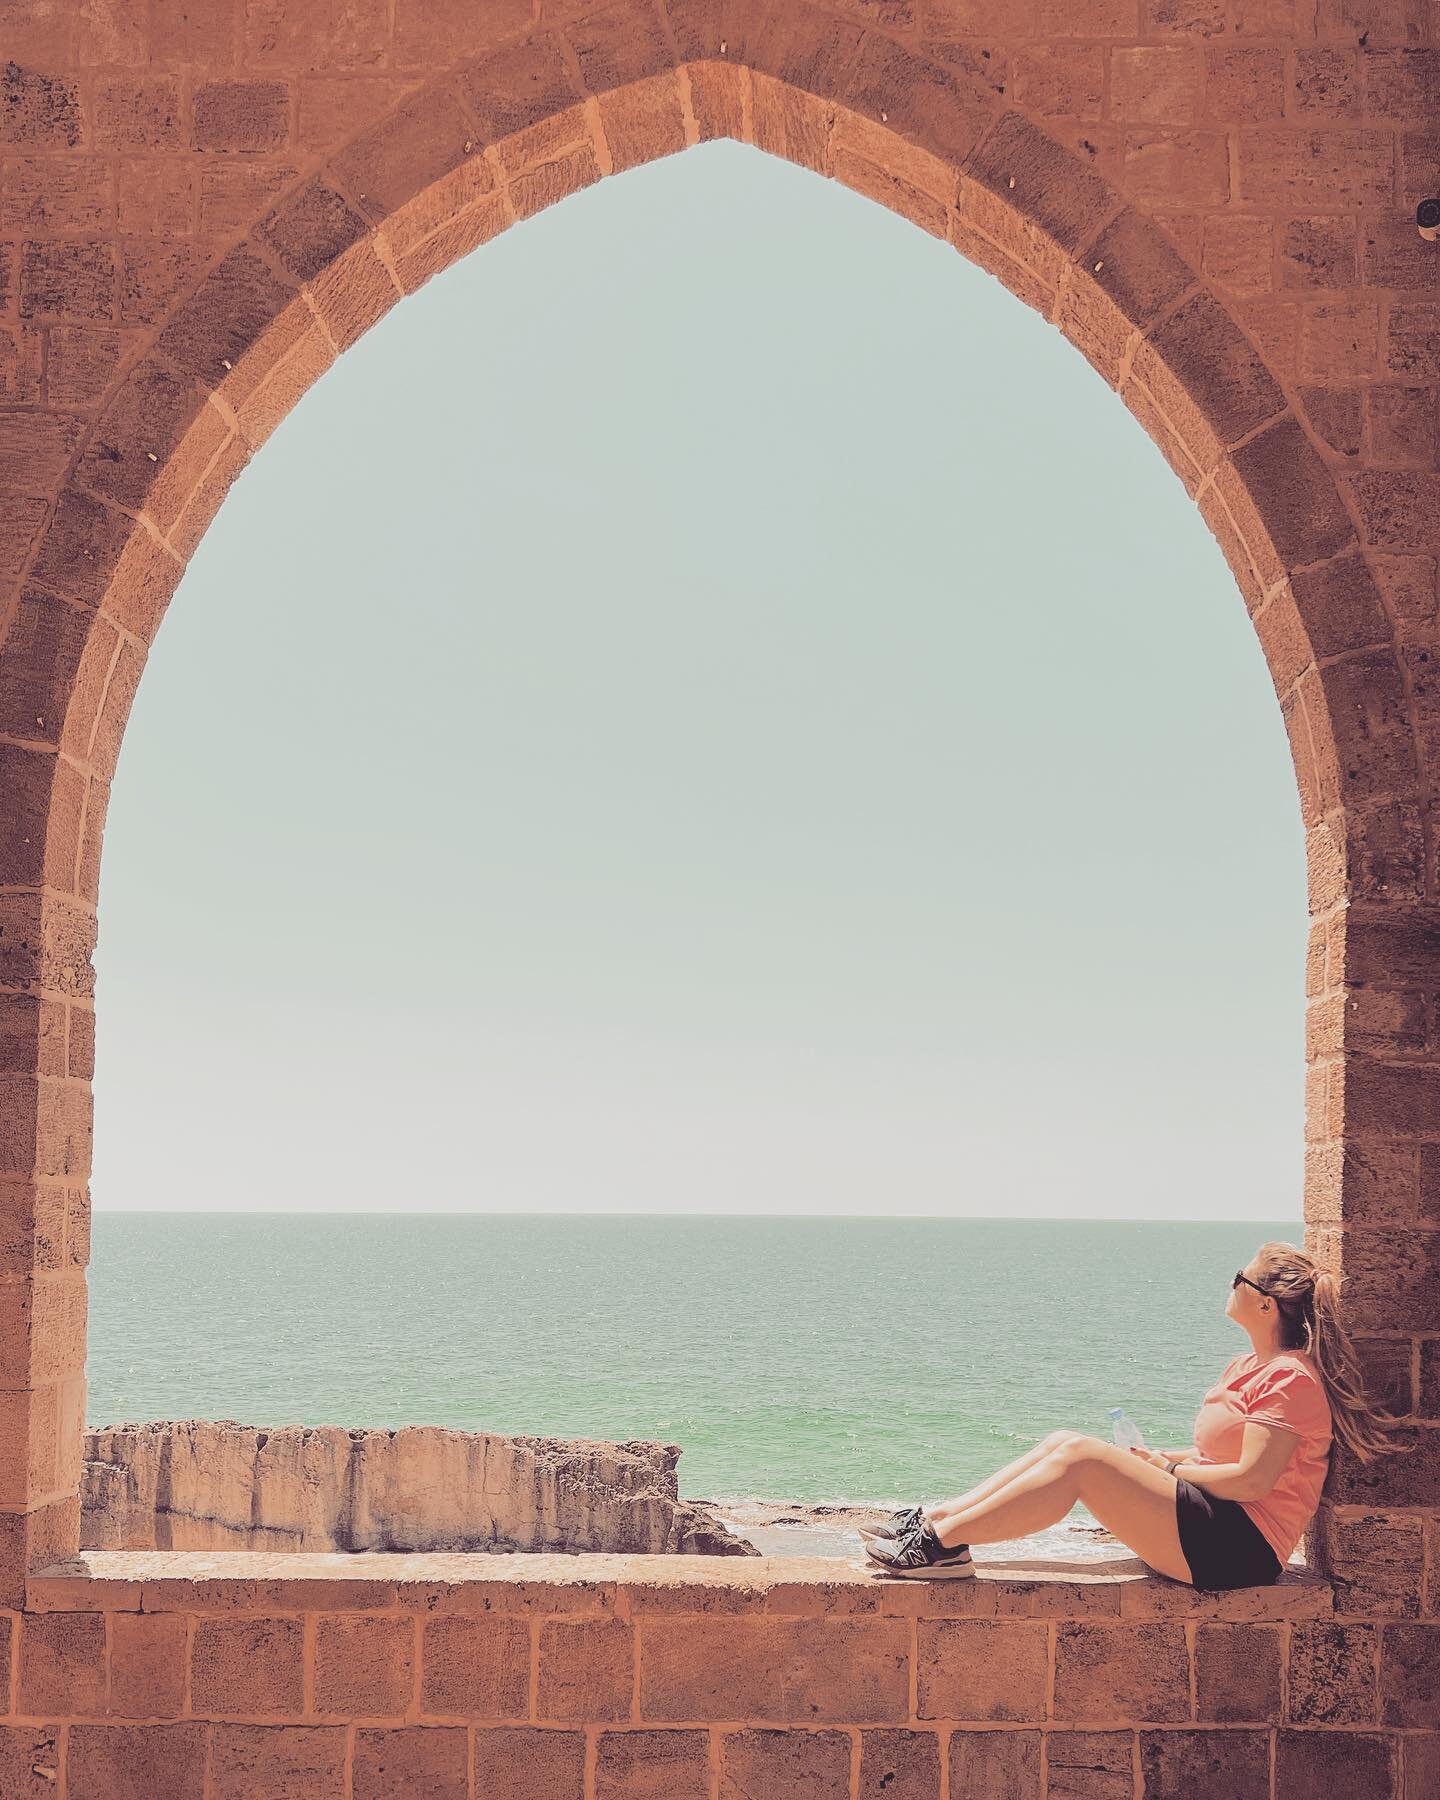 Lebanon holiday part 1 🇱🇧 in Batroun.

📍Near the Phoenician wall and Church of Our Lady of the Sea
📍 Sunset drinks and nibbles at @bolerobatroun
📍 Mooching around Batroun village
📍 Trail along the Mseilha walkway with stunning coastal views
📍 